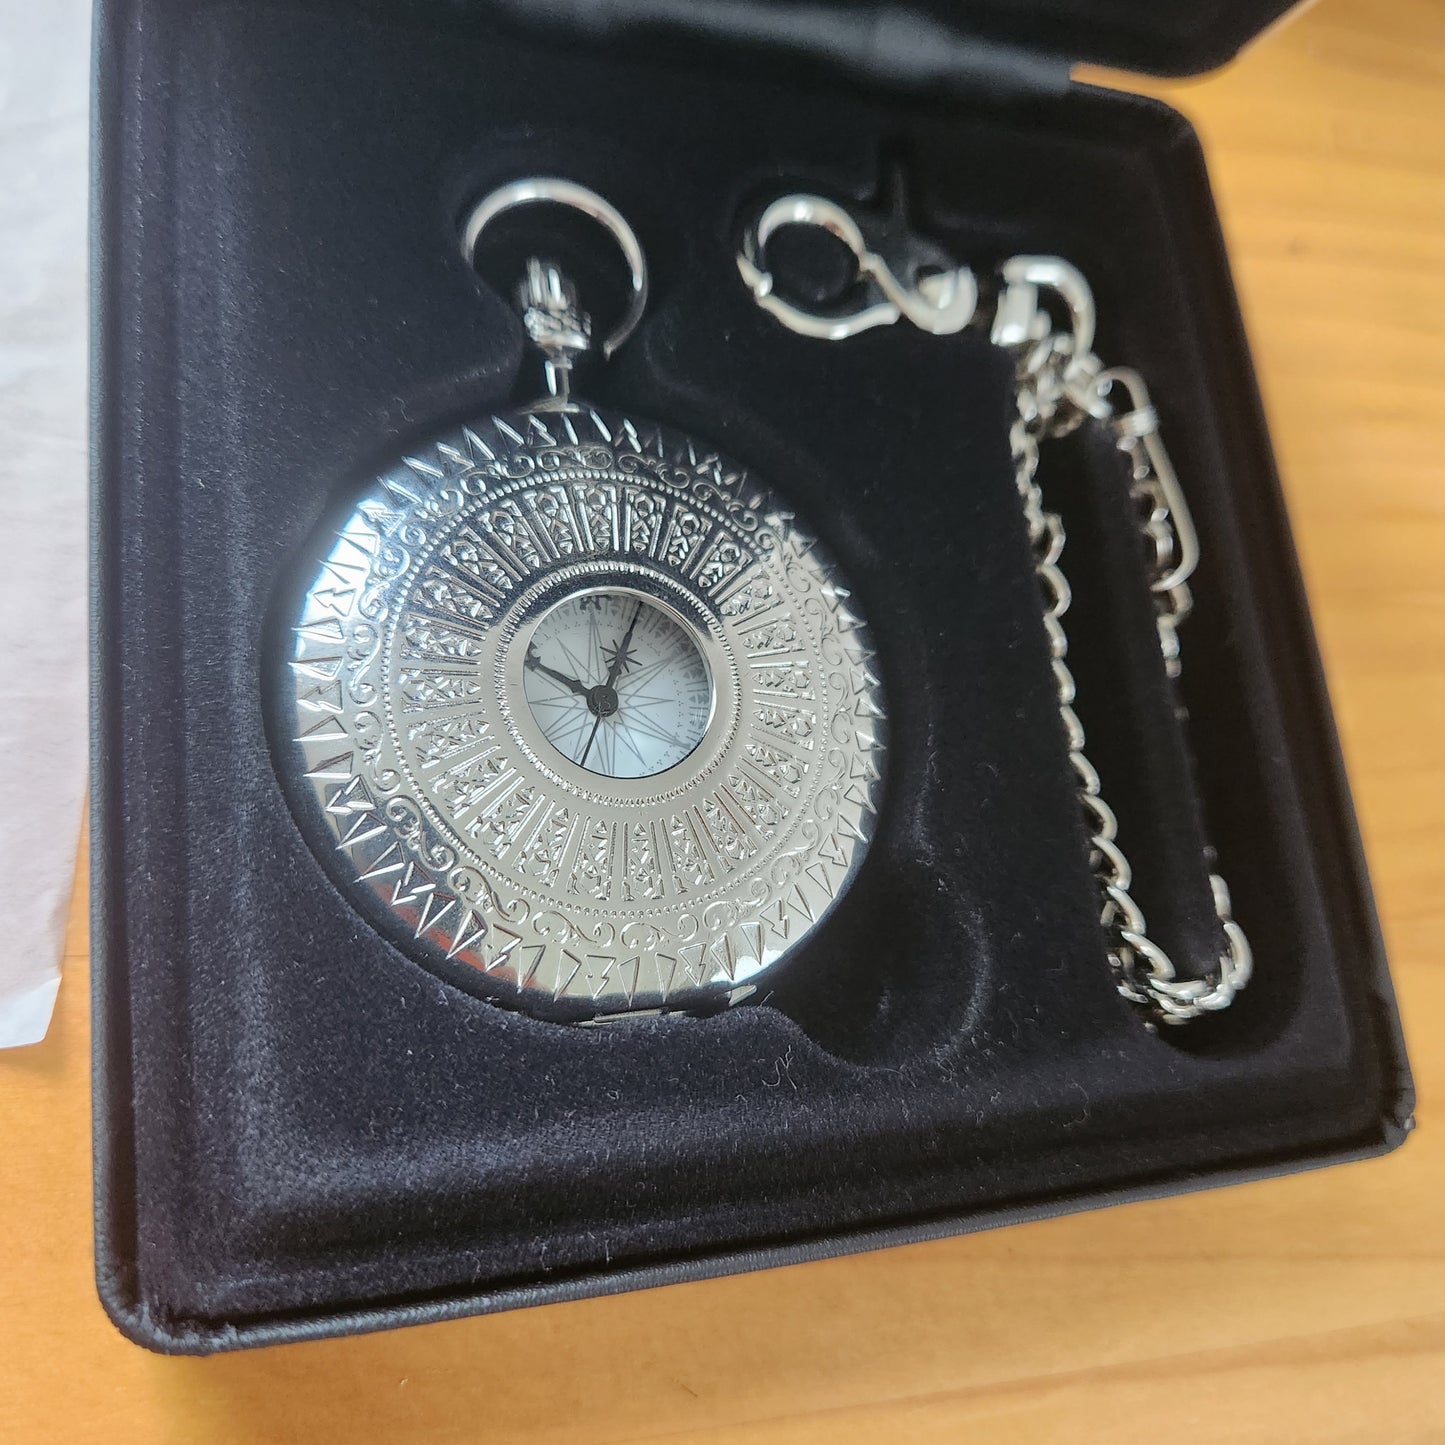 [tear on box, scratch on case / no use the pocket watch] Omniscient Reader's Viewpoint Pocket Watch